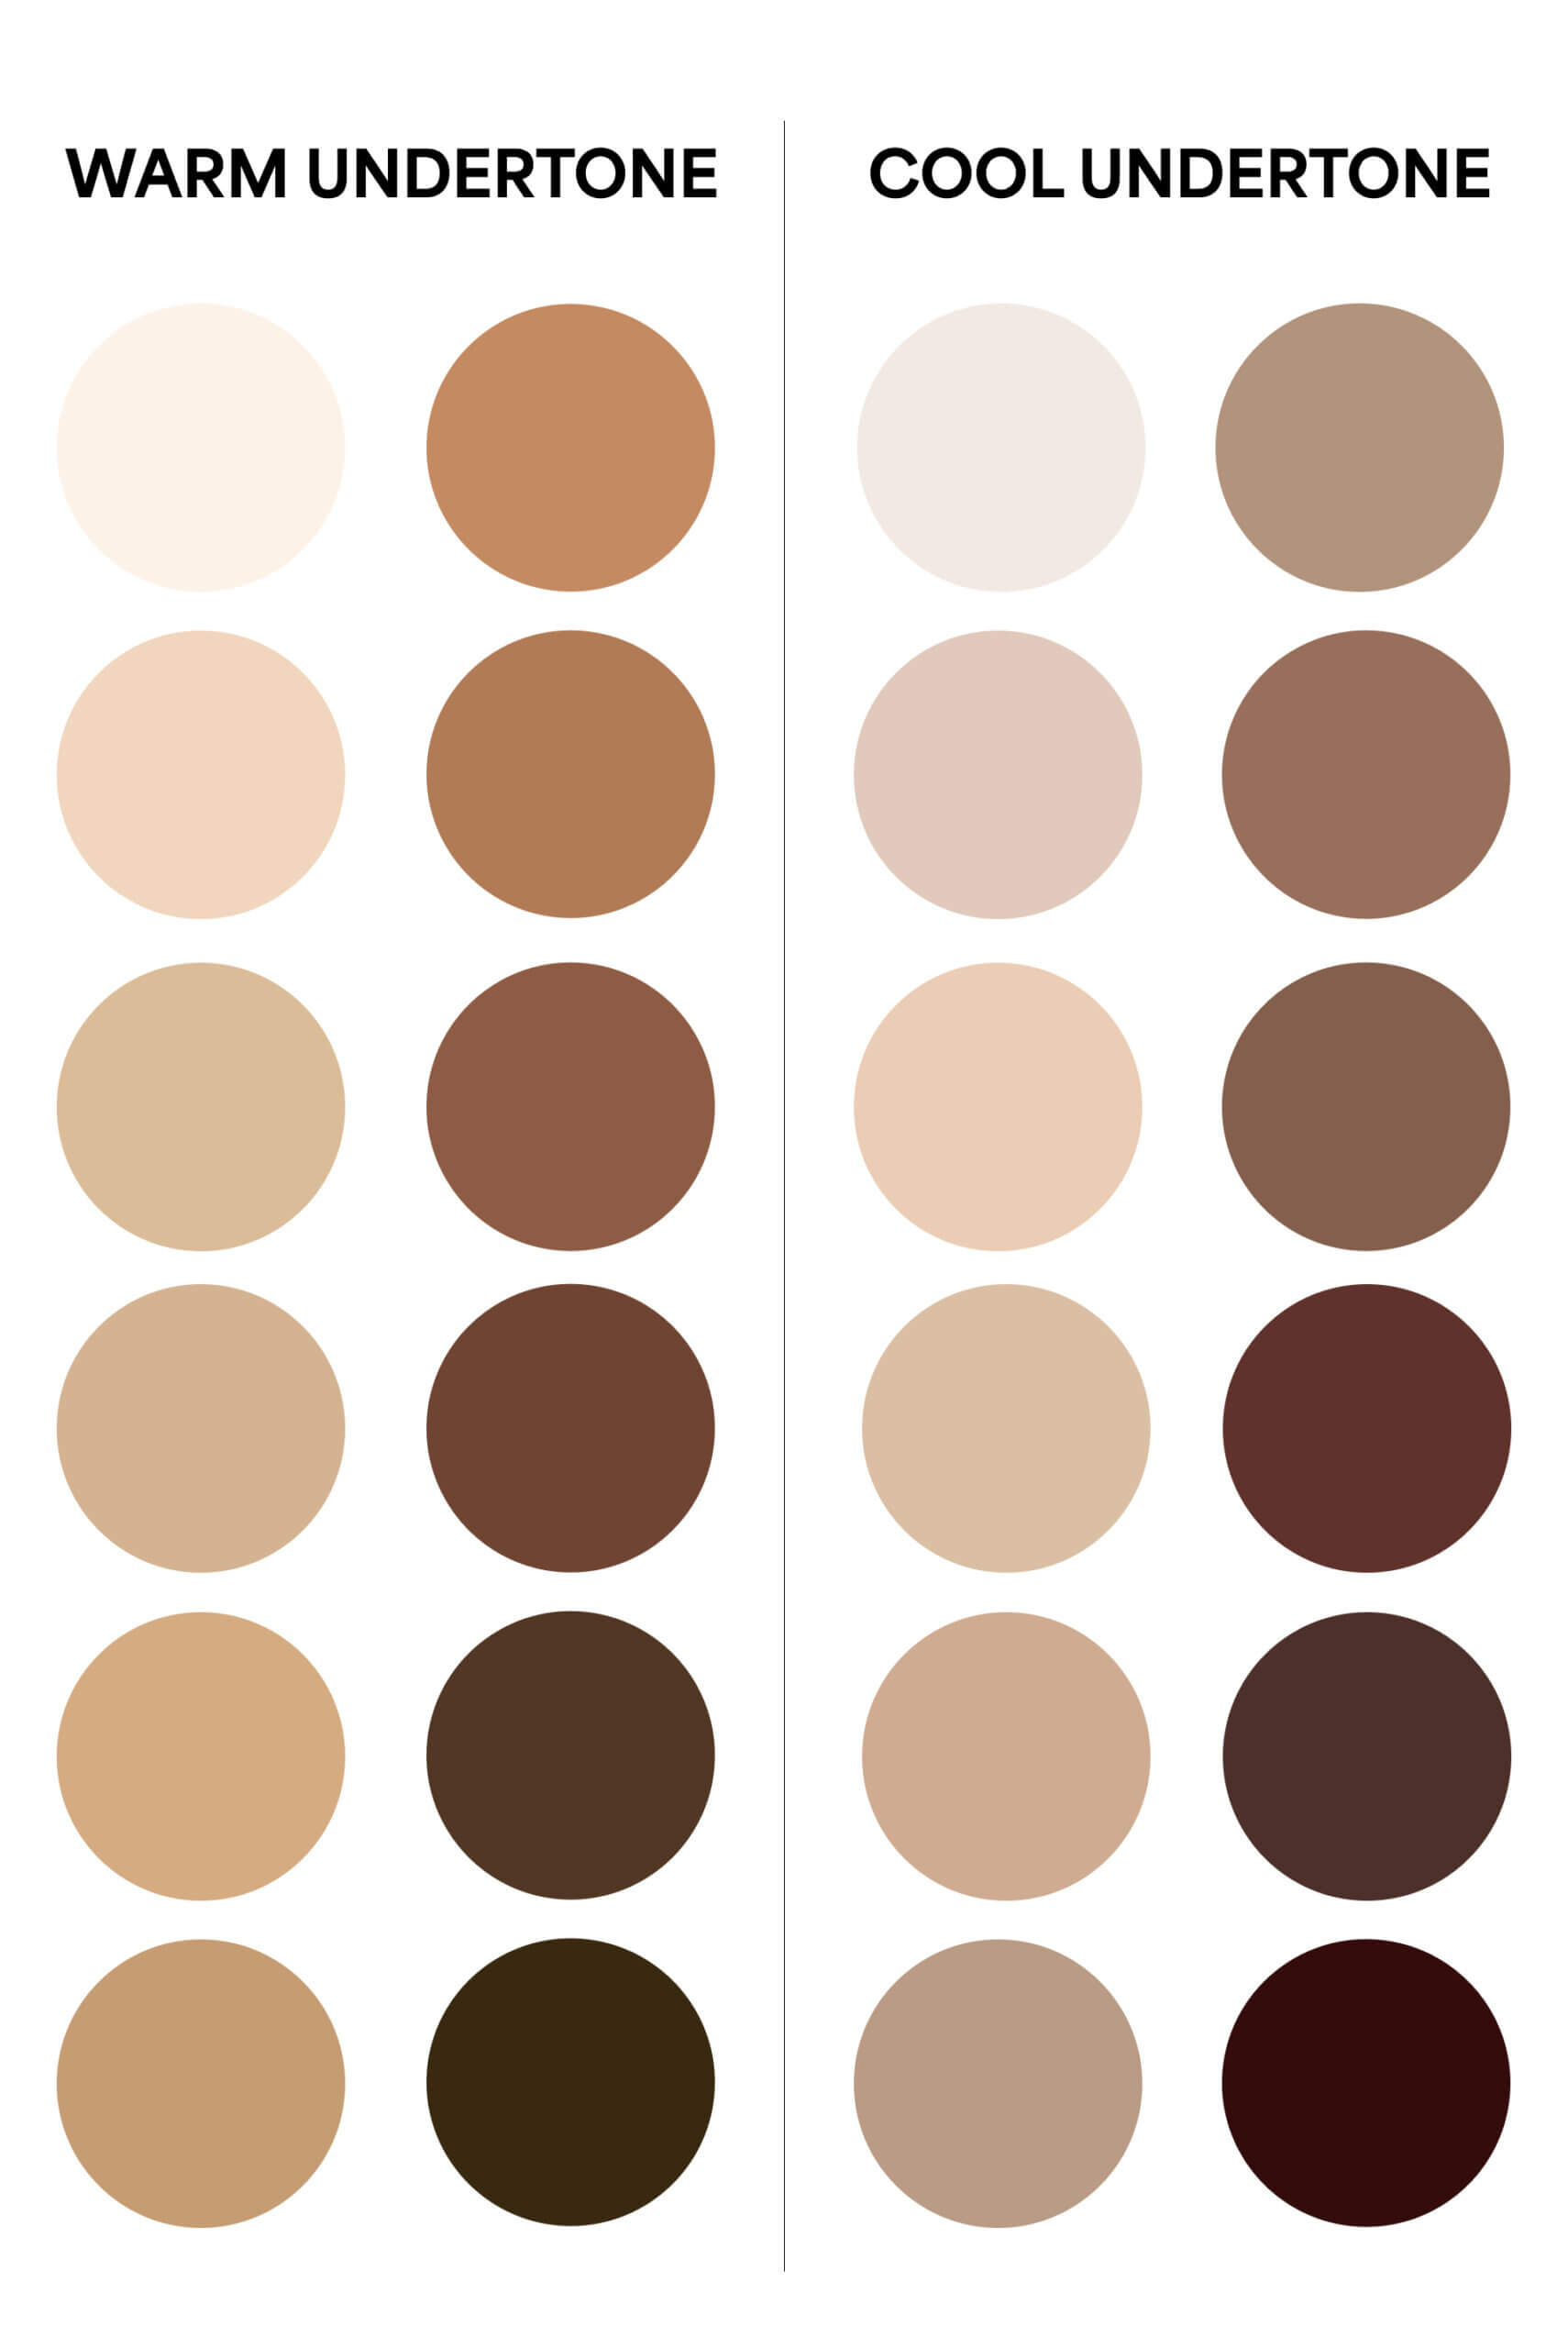 Chart of warm and cool skin tones